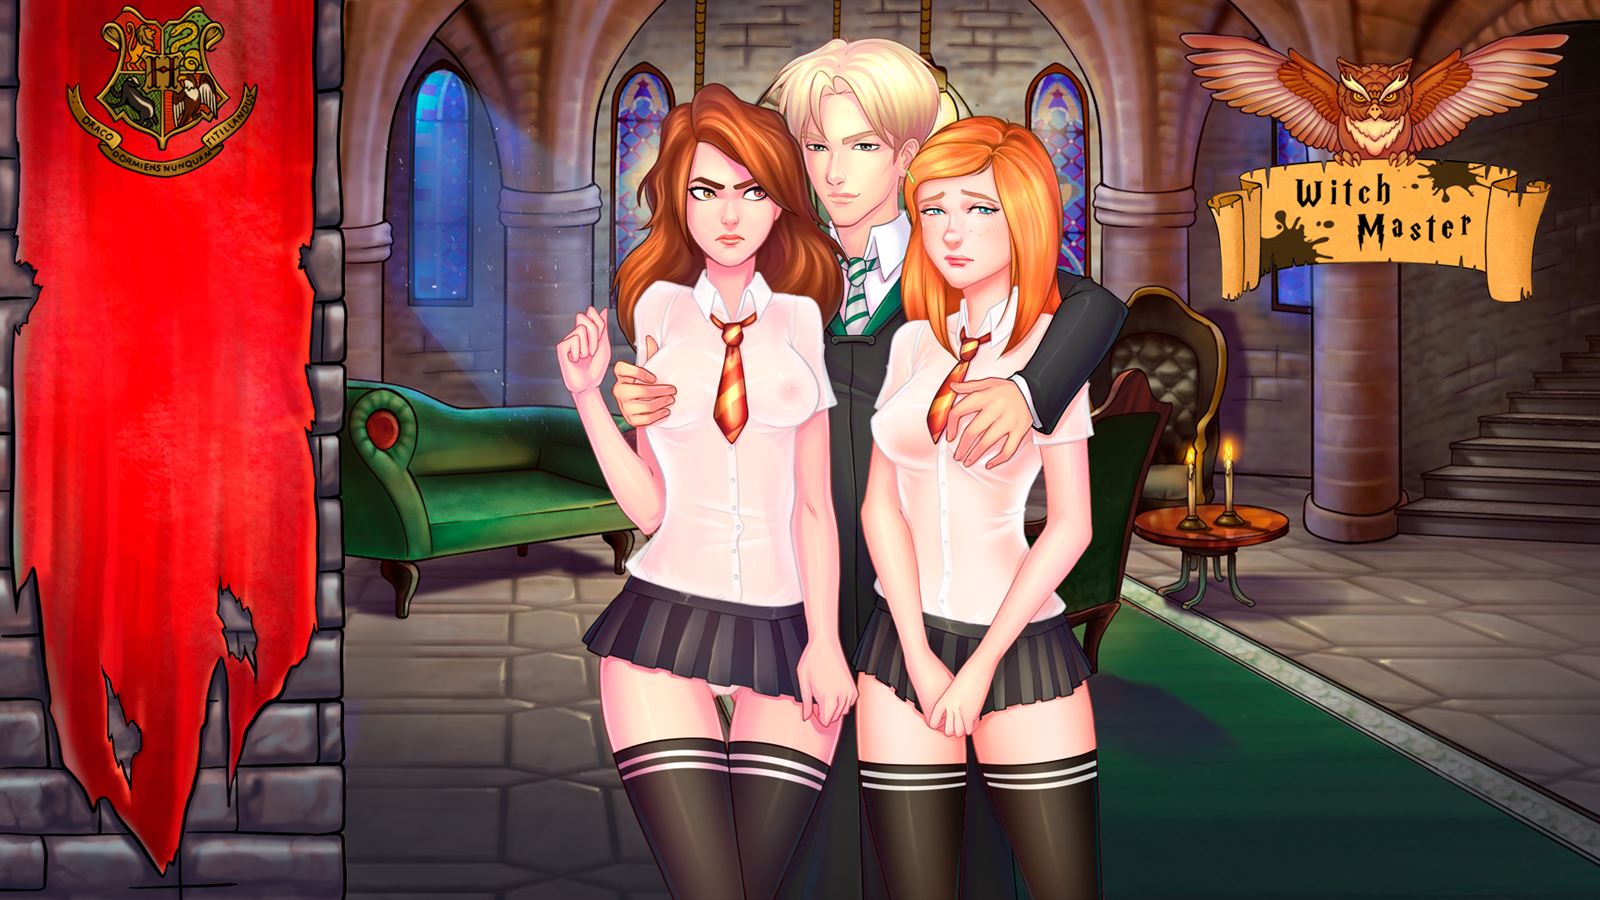 Witch - Witch Master Ren'Py Porn Sex Game v.0.1.9 Download for Windows, MacOS,  Android